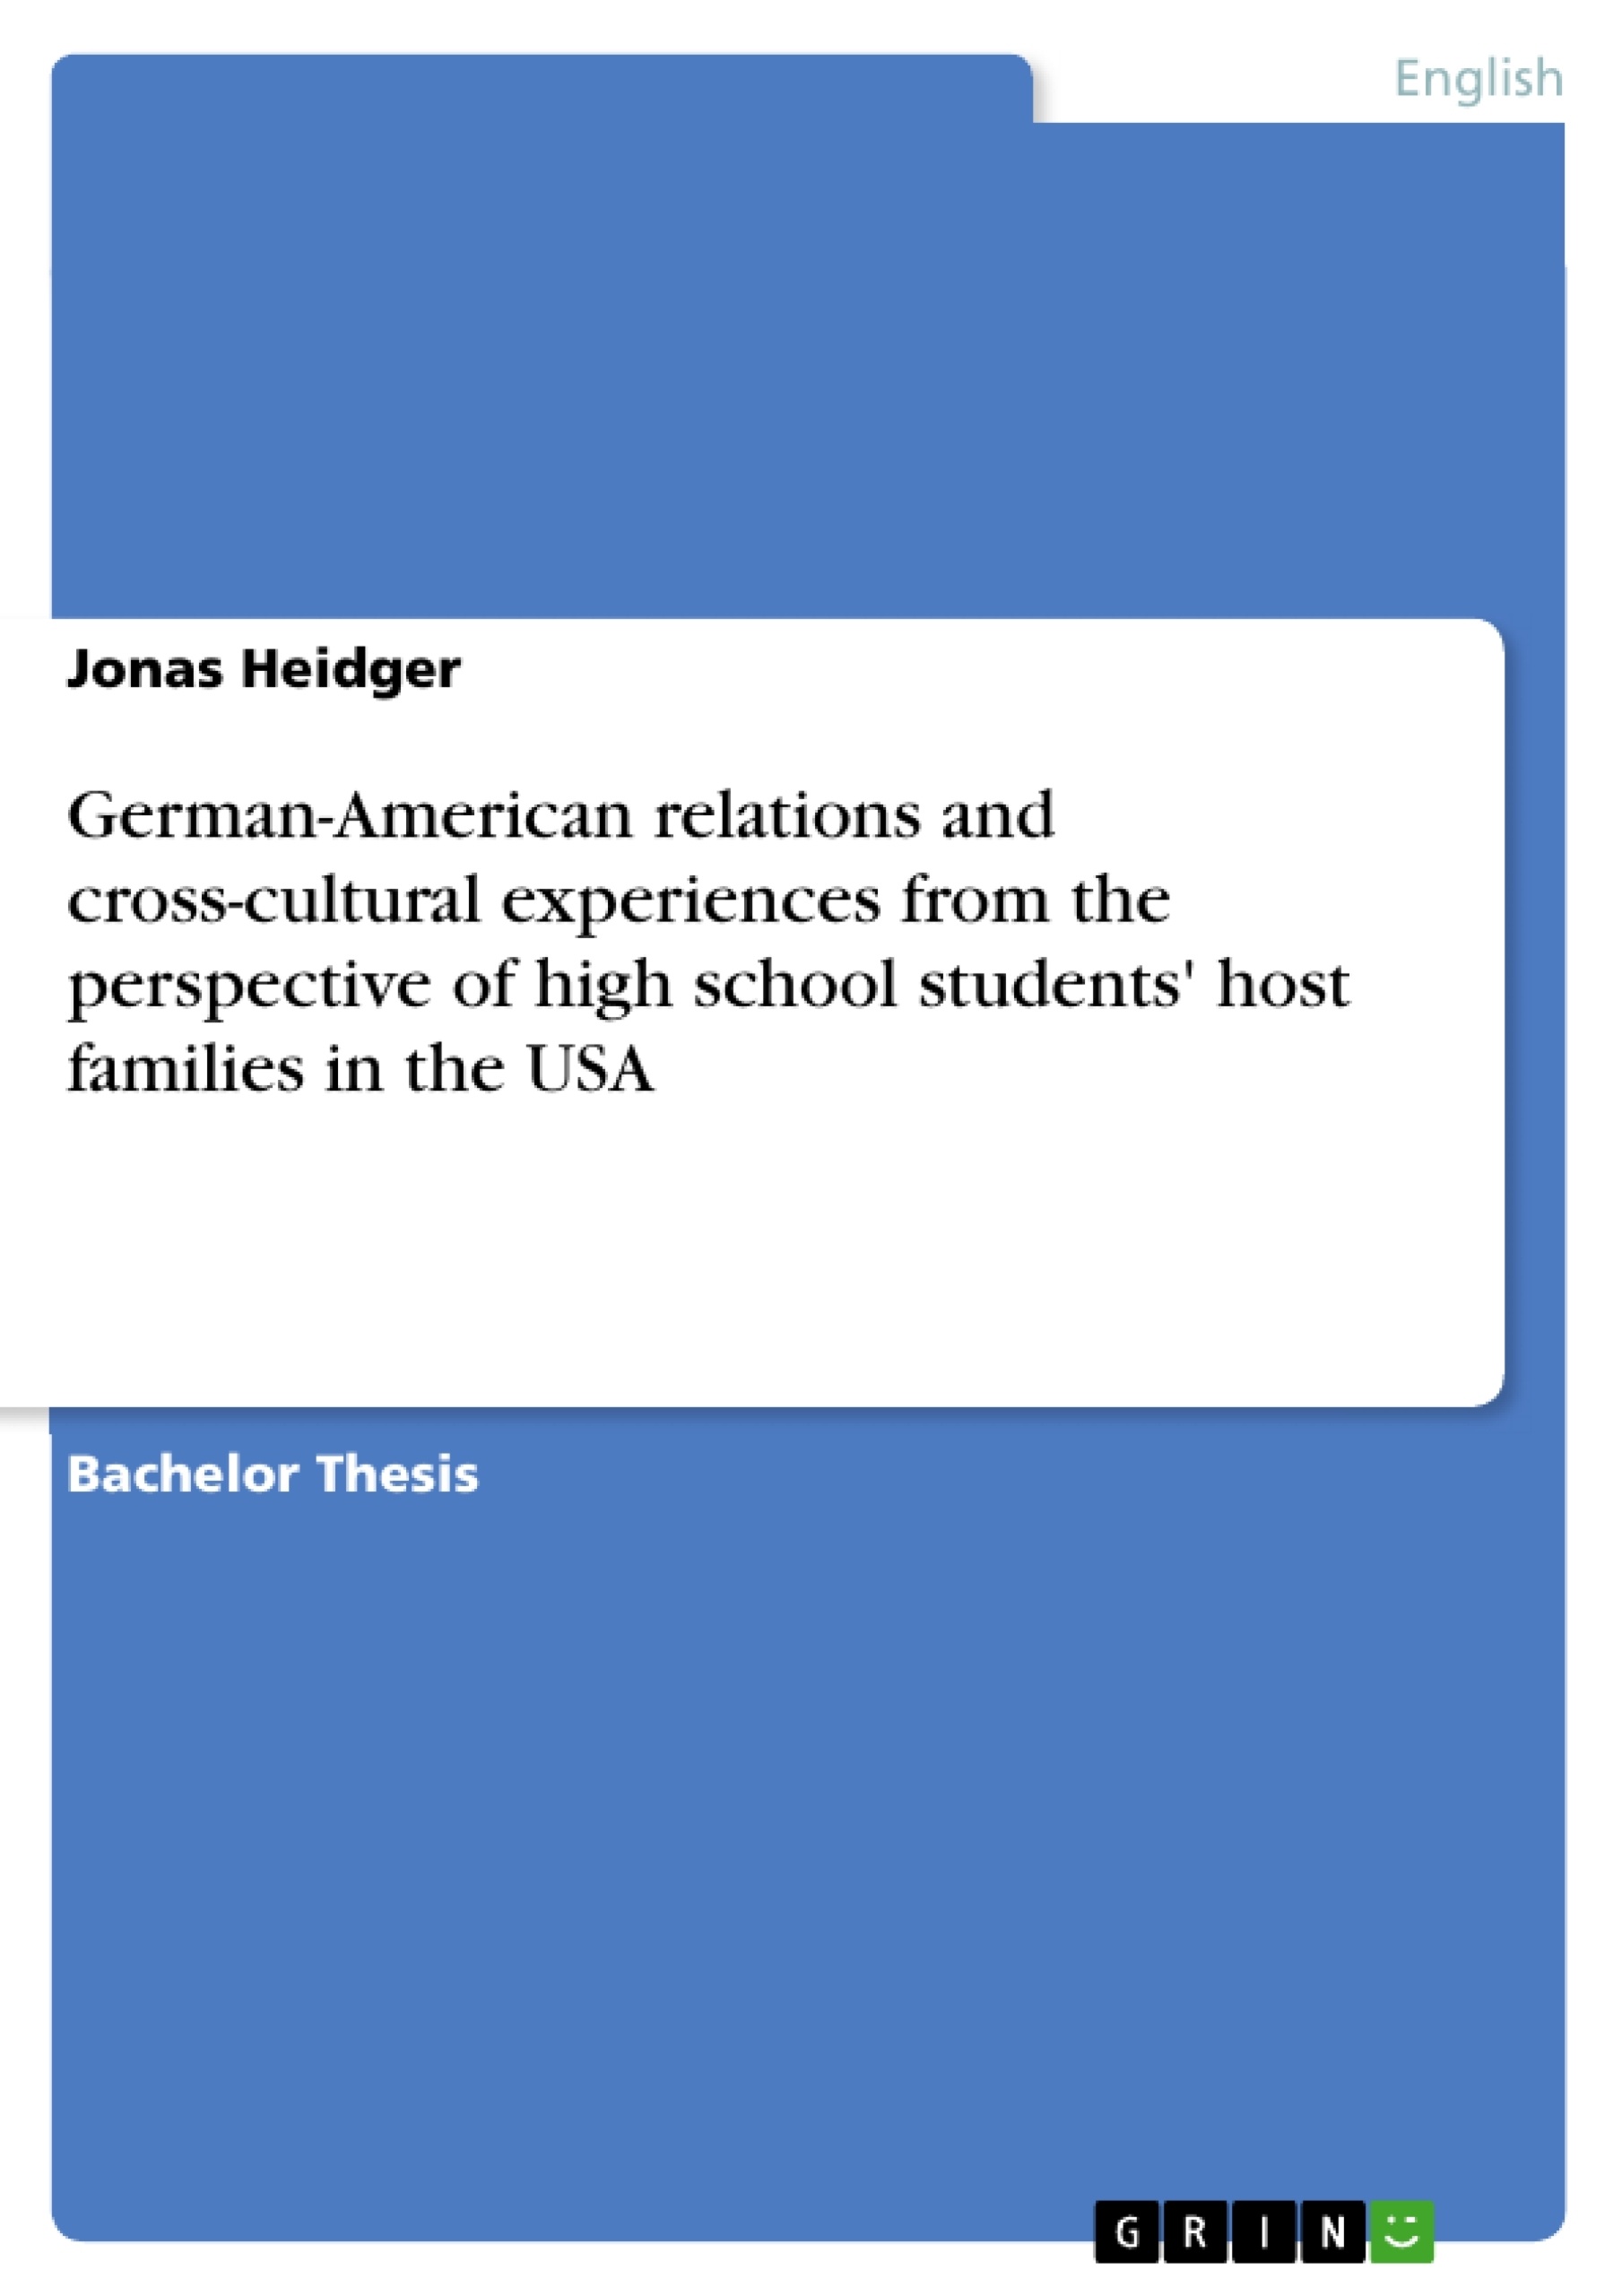 Título: German-American relations and cross-cultural experiences from the perspective of high school students' host families in the USA